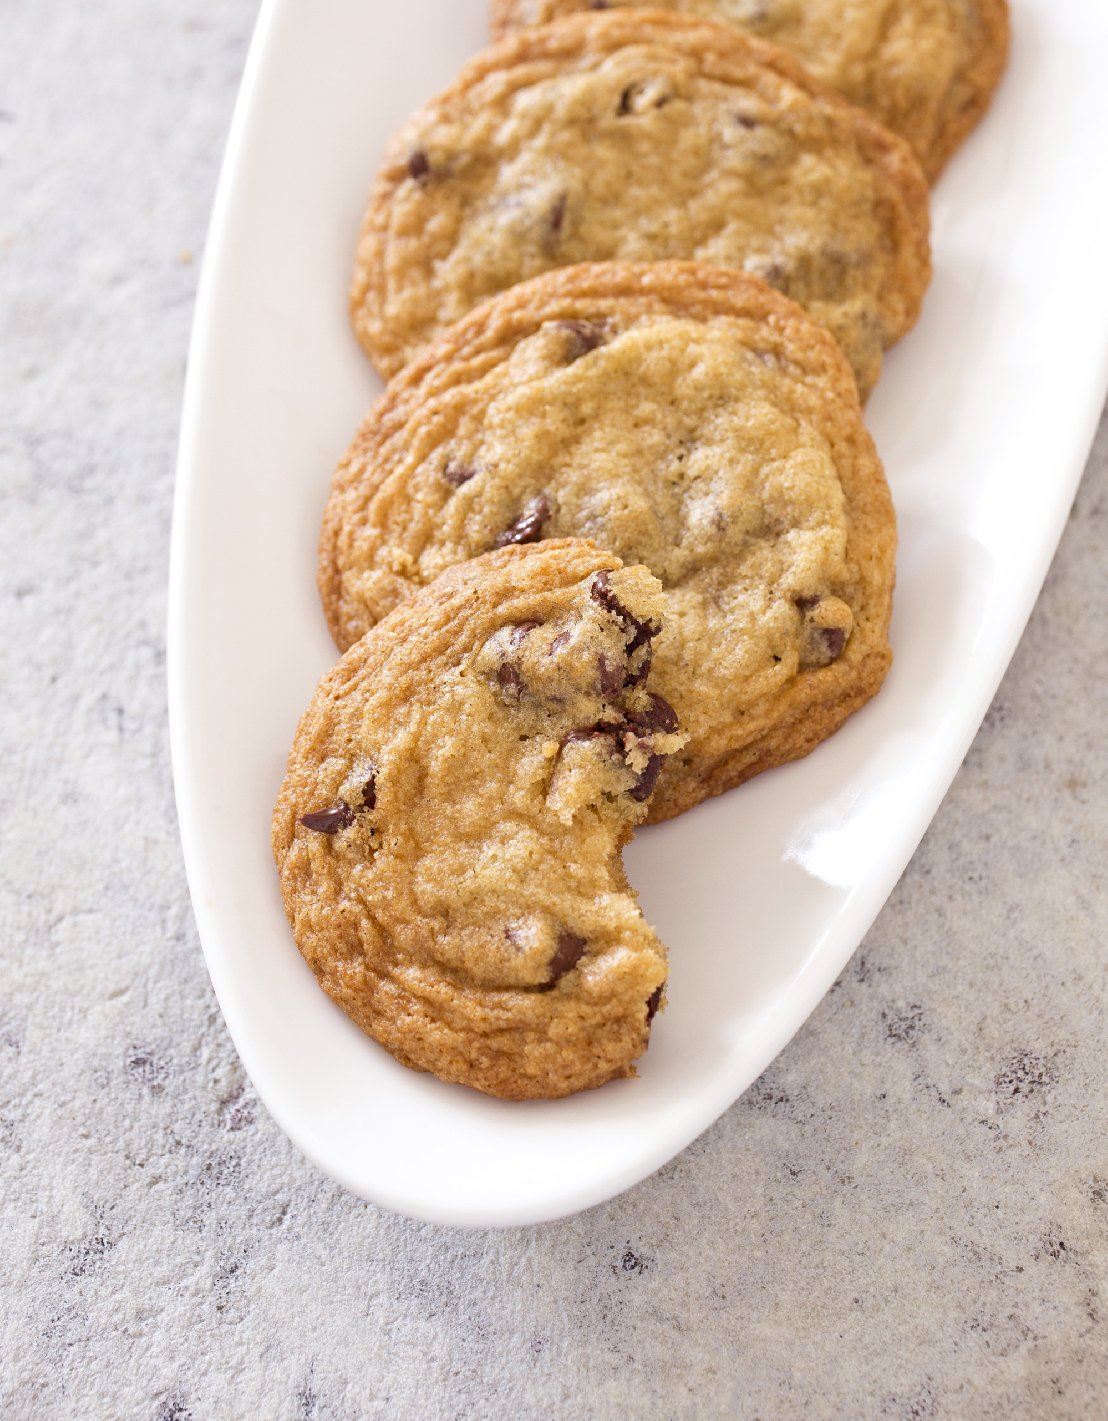 Chocolate Chip Cookies. Courtesy of America's Test Kitchen